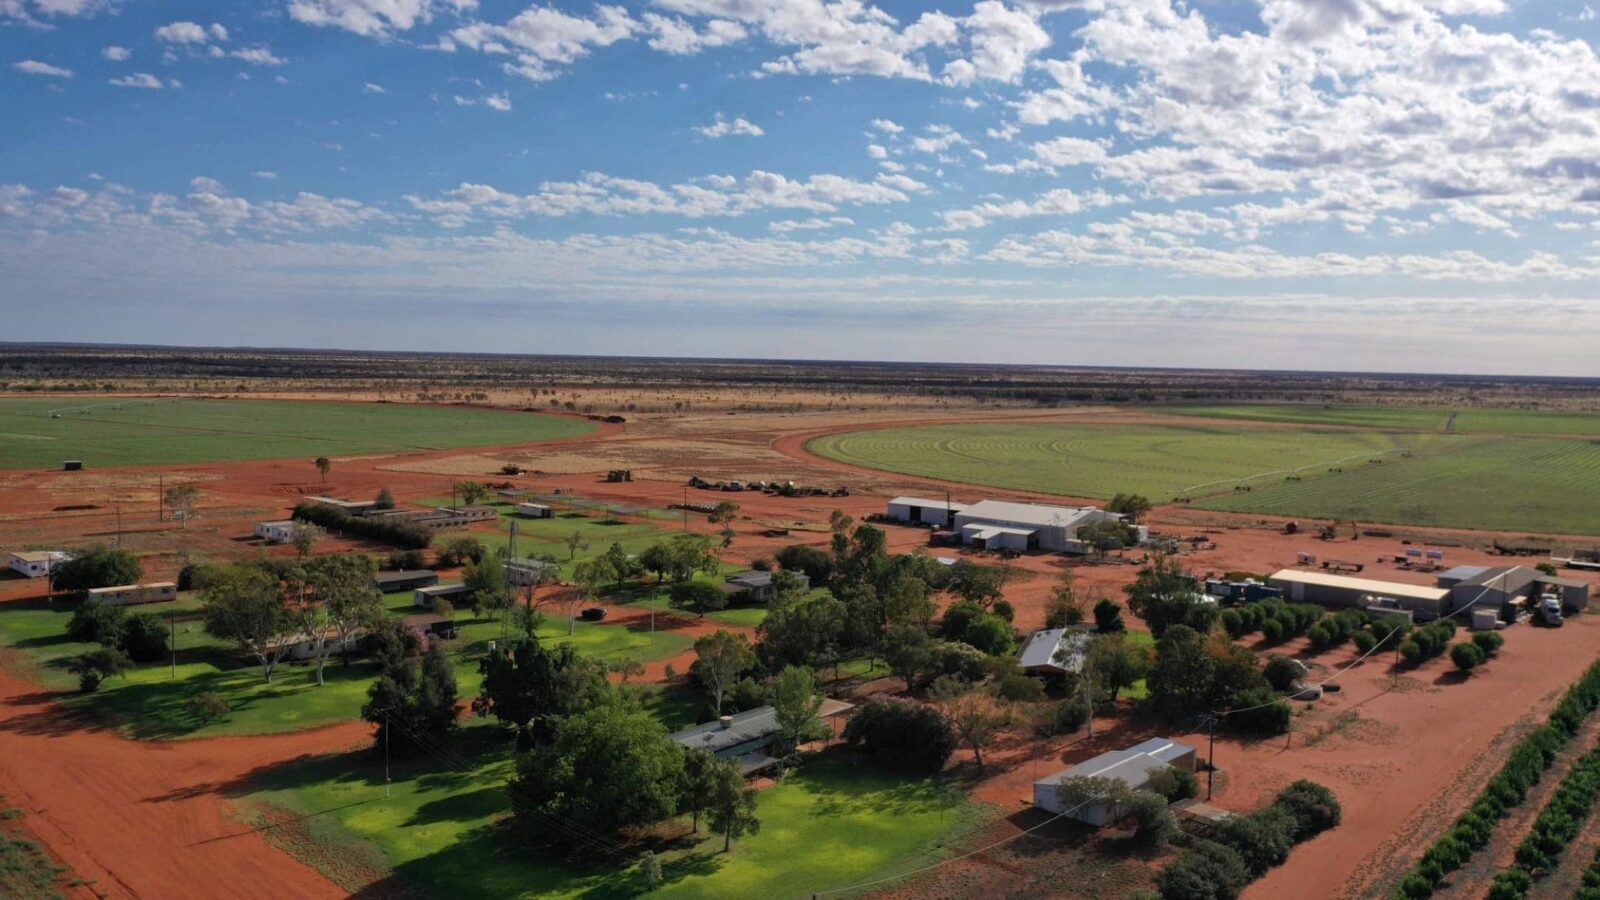 Birds eye view of Athelle Outback Hideaway